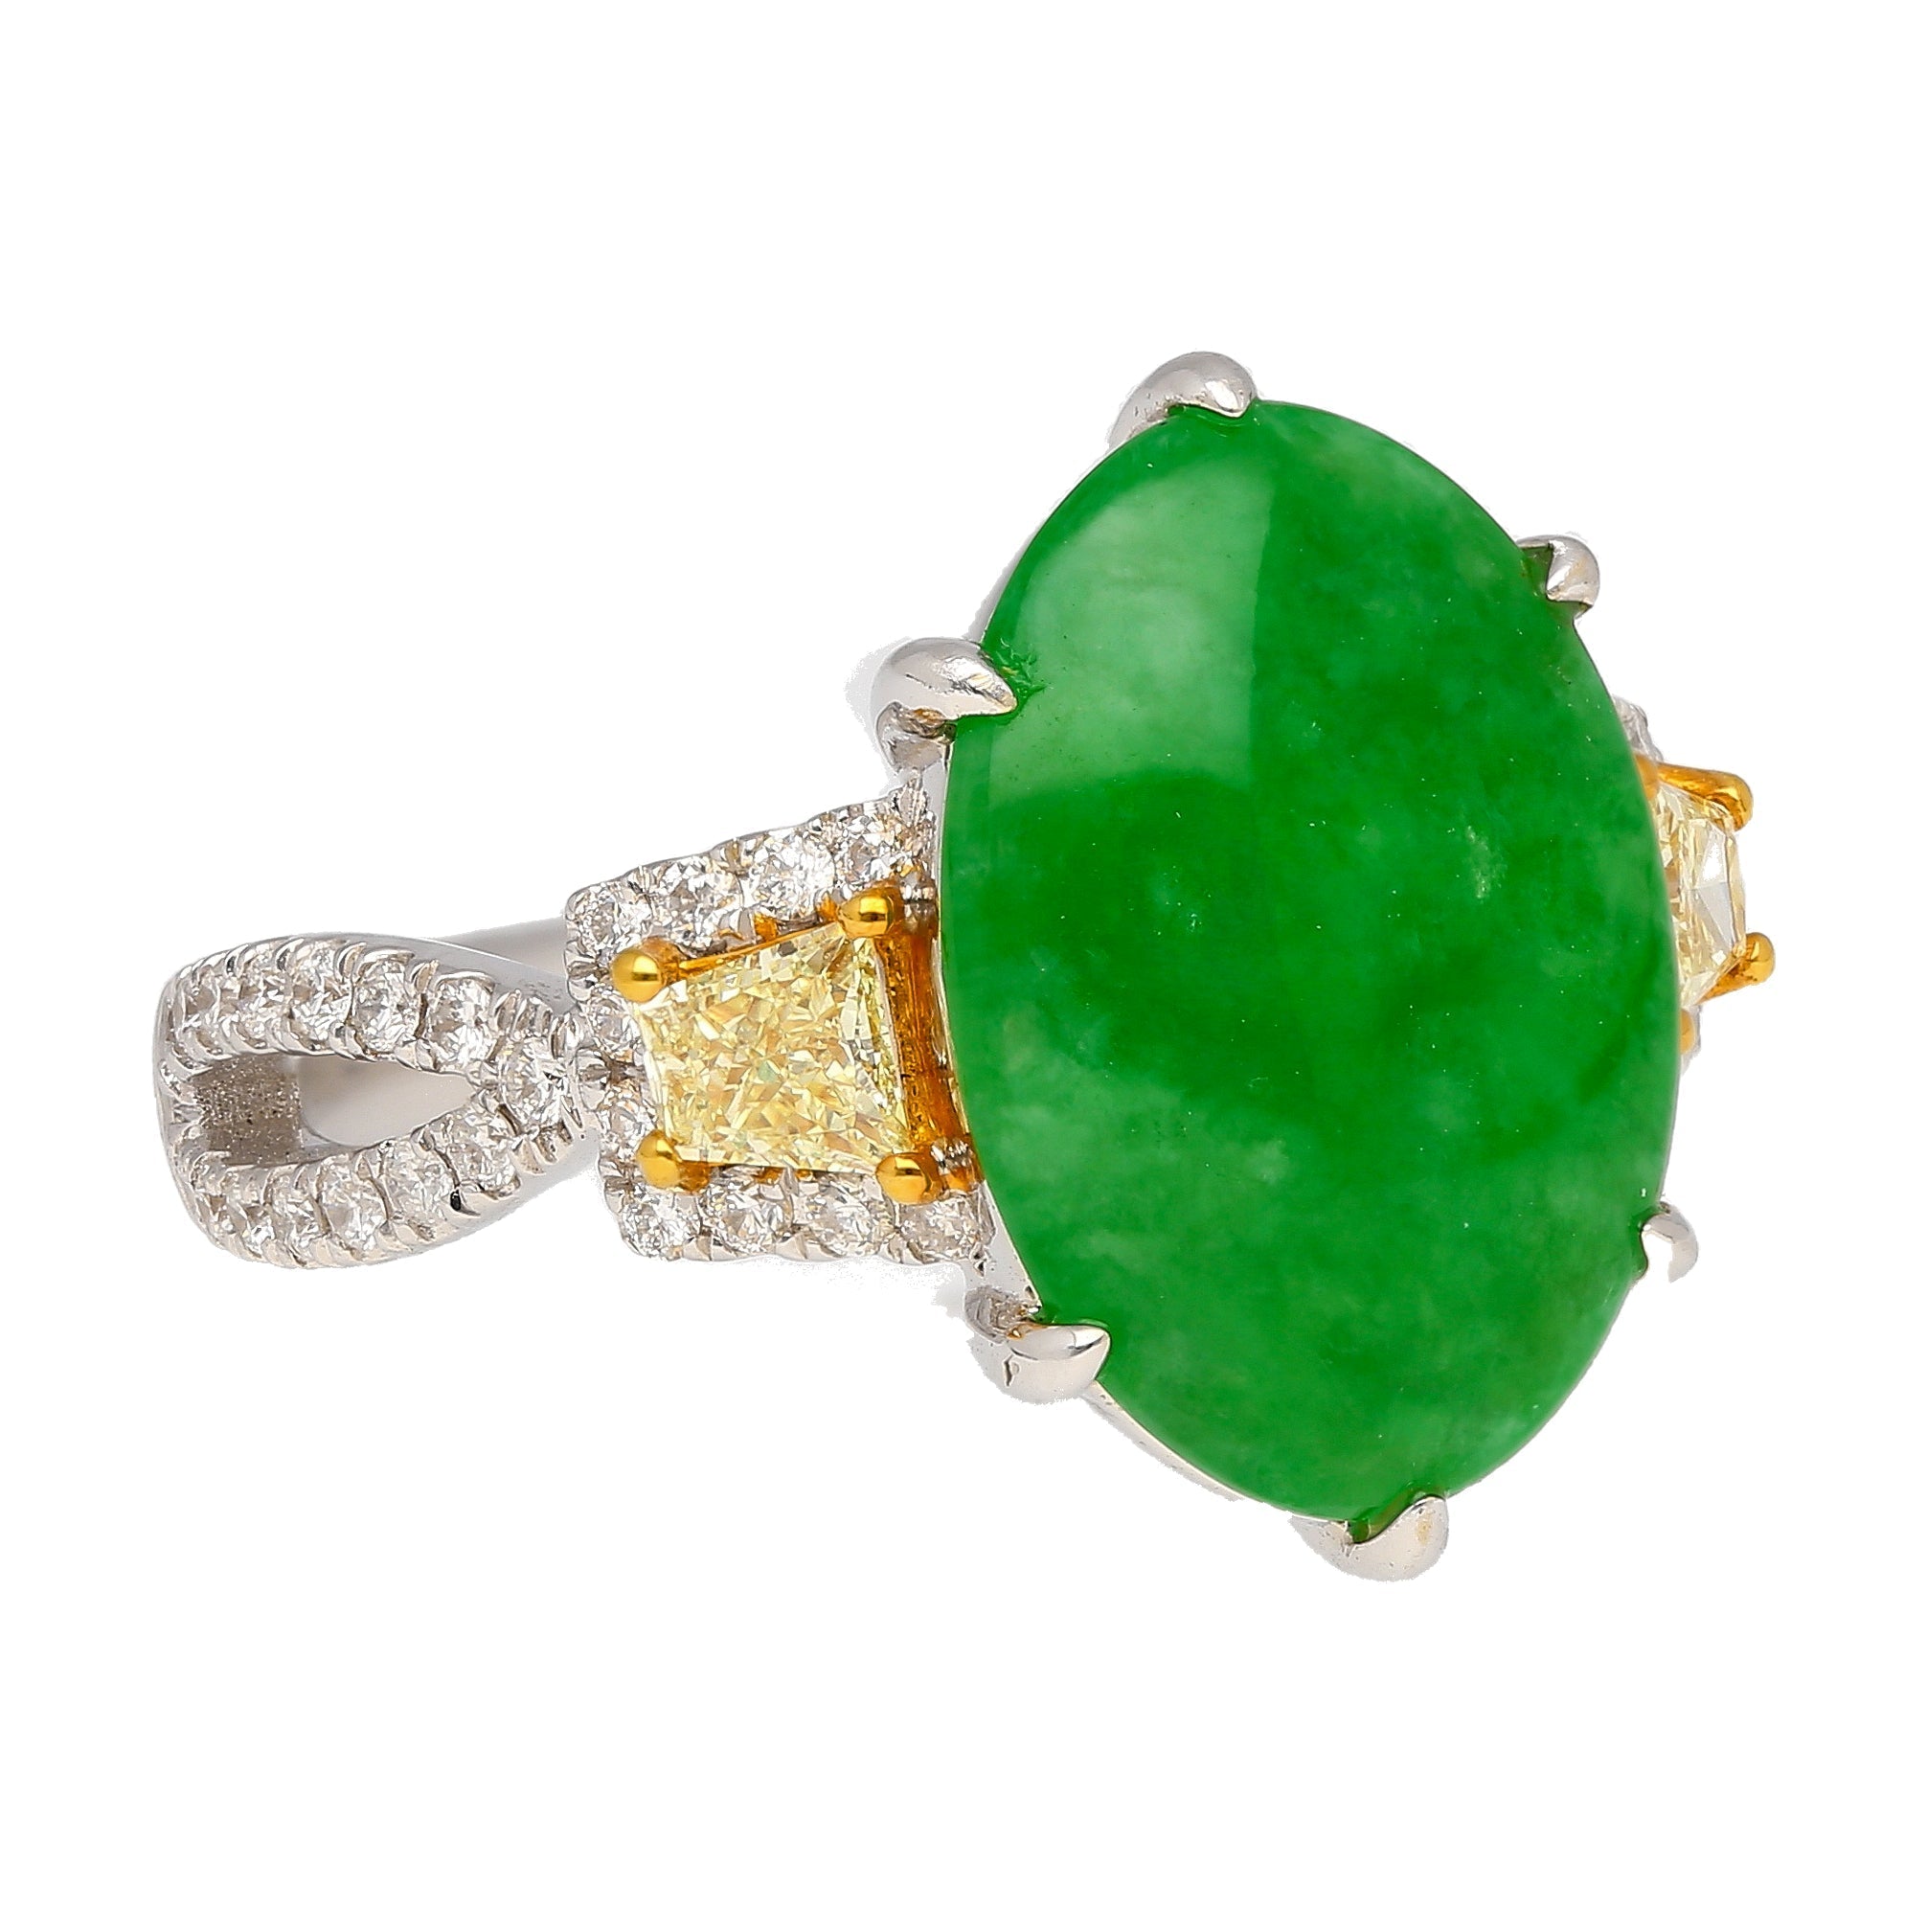 4.76 Carat Jadeite Jade with Trapezoid Cut Yellow Diamond Side Stone Ring in 18k White Gold-Rings-ASSAY